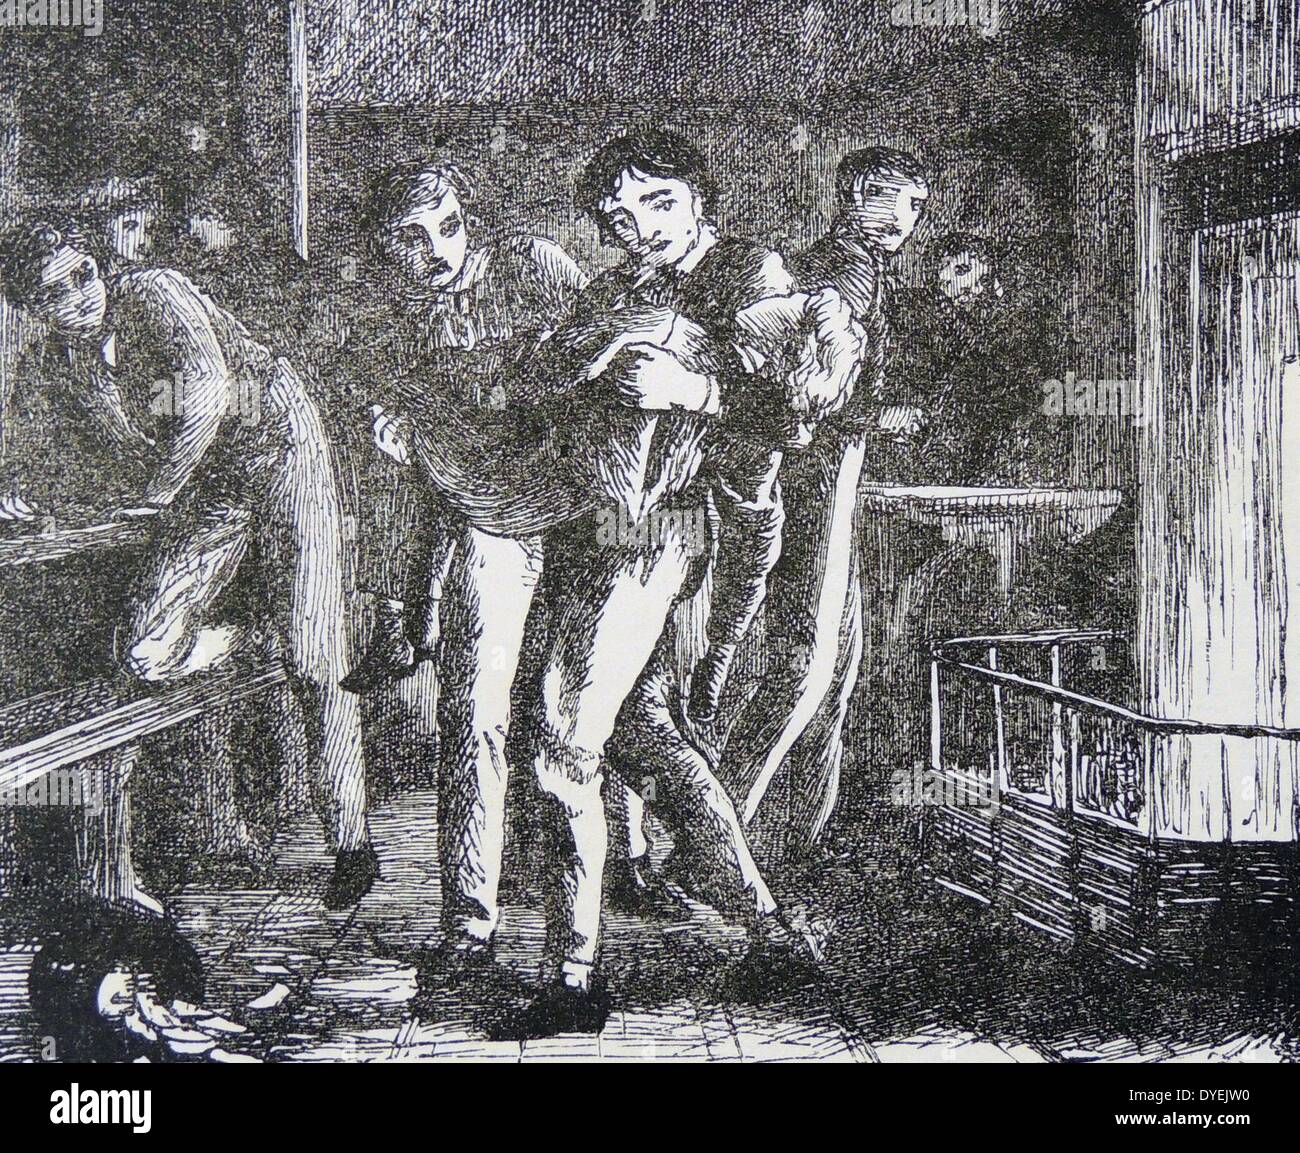 Tom roasted for refusing to let the bully Flashman have his Derby lottery ticket. Illustration for 1869 edition of ''Tom Brown's Schooldays by Thomas Hughes. Original edition 1857. Stock Photo